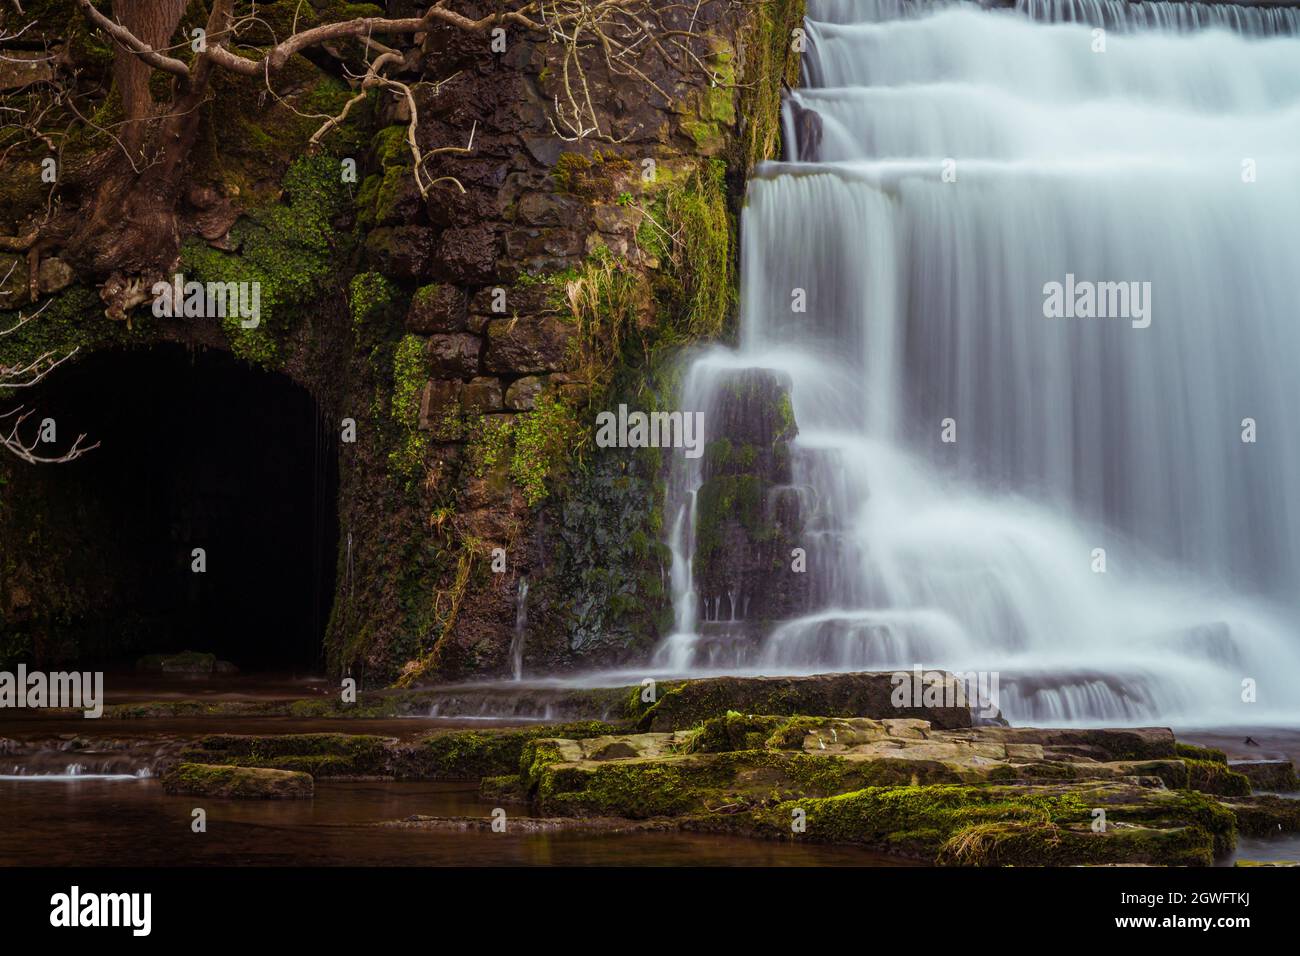 Long exposure of the Monsal Dale Weir waterfall and River Wye on the Monsal Trail in the Peak District Stock Photo